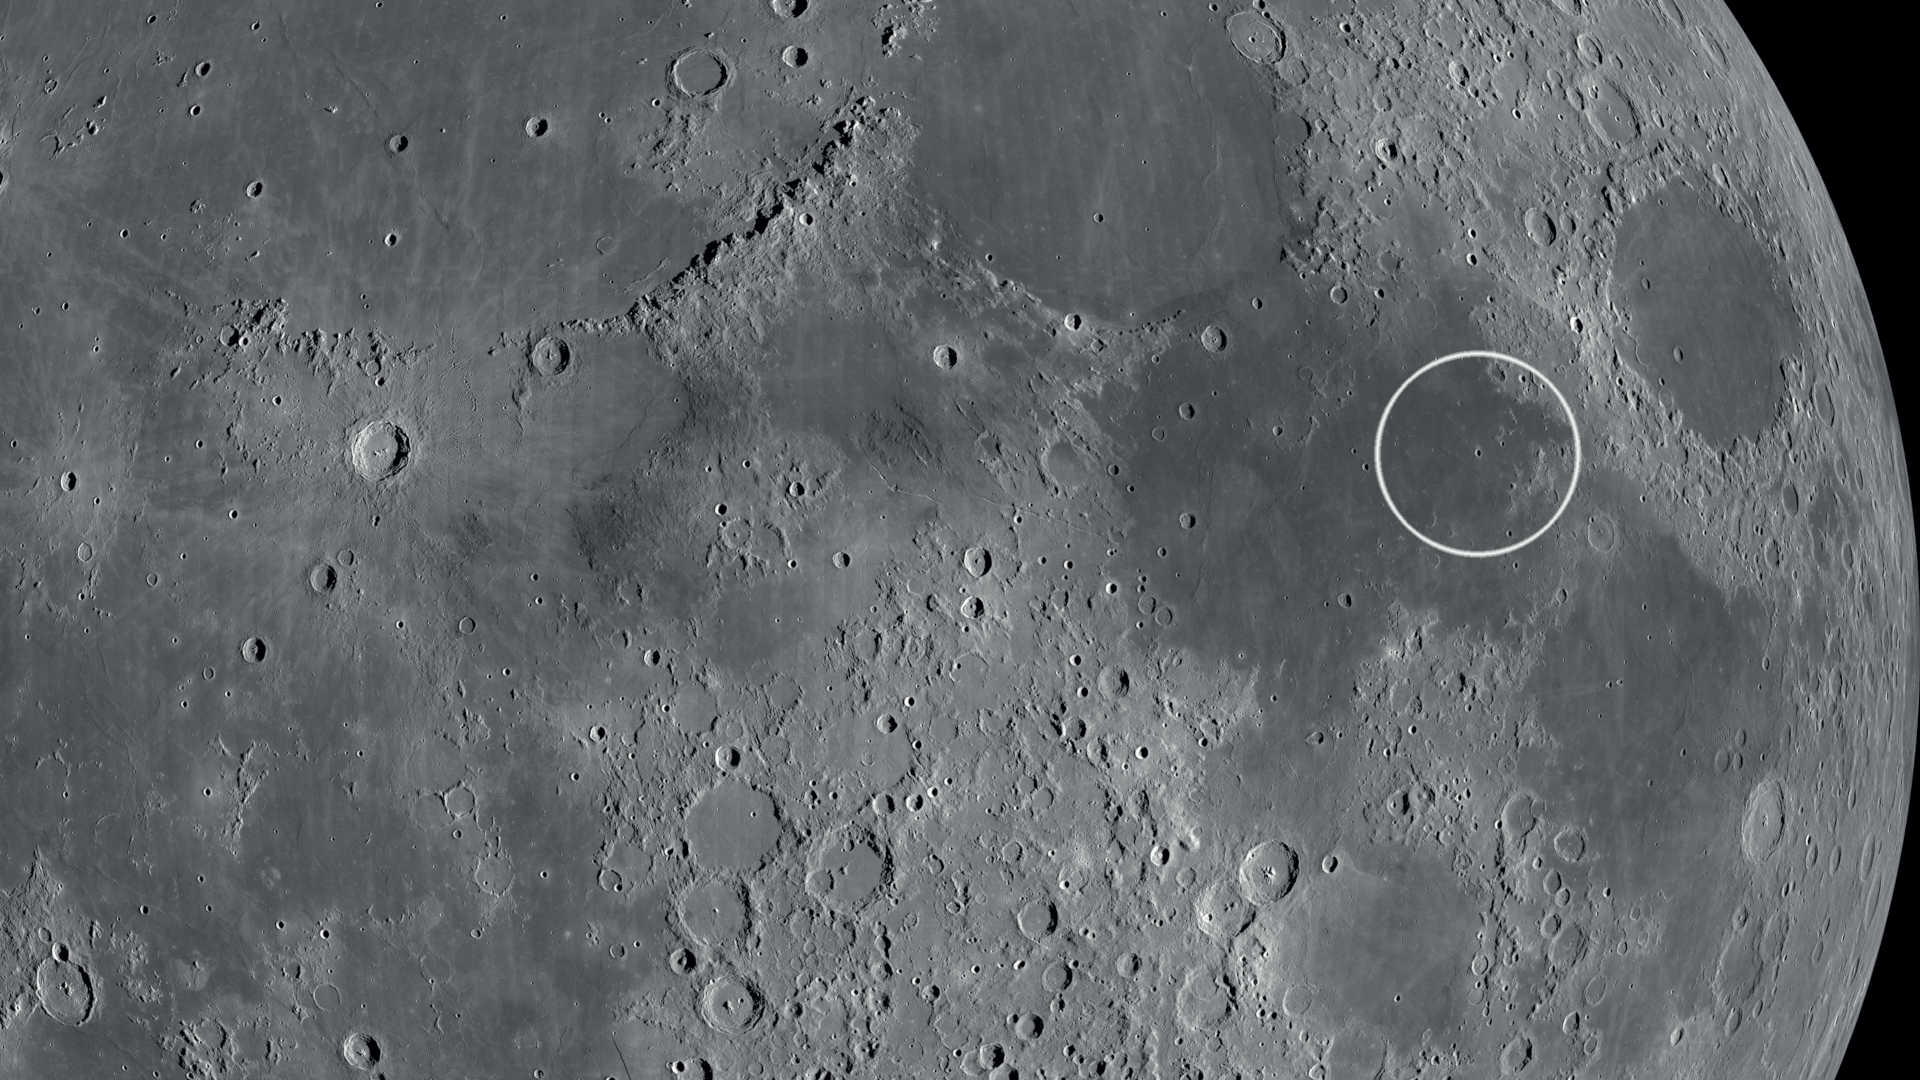 Rima and Rupes Cauchy are located on the east side of Mare Tranquillitatis. NASA/GSFC/Arizona State University